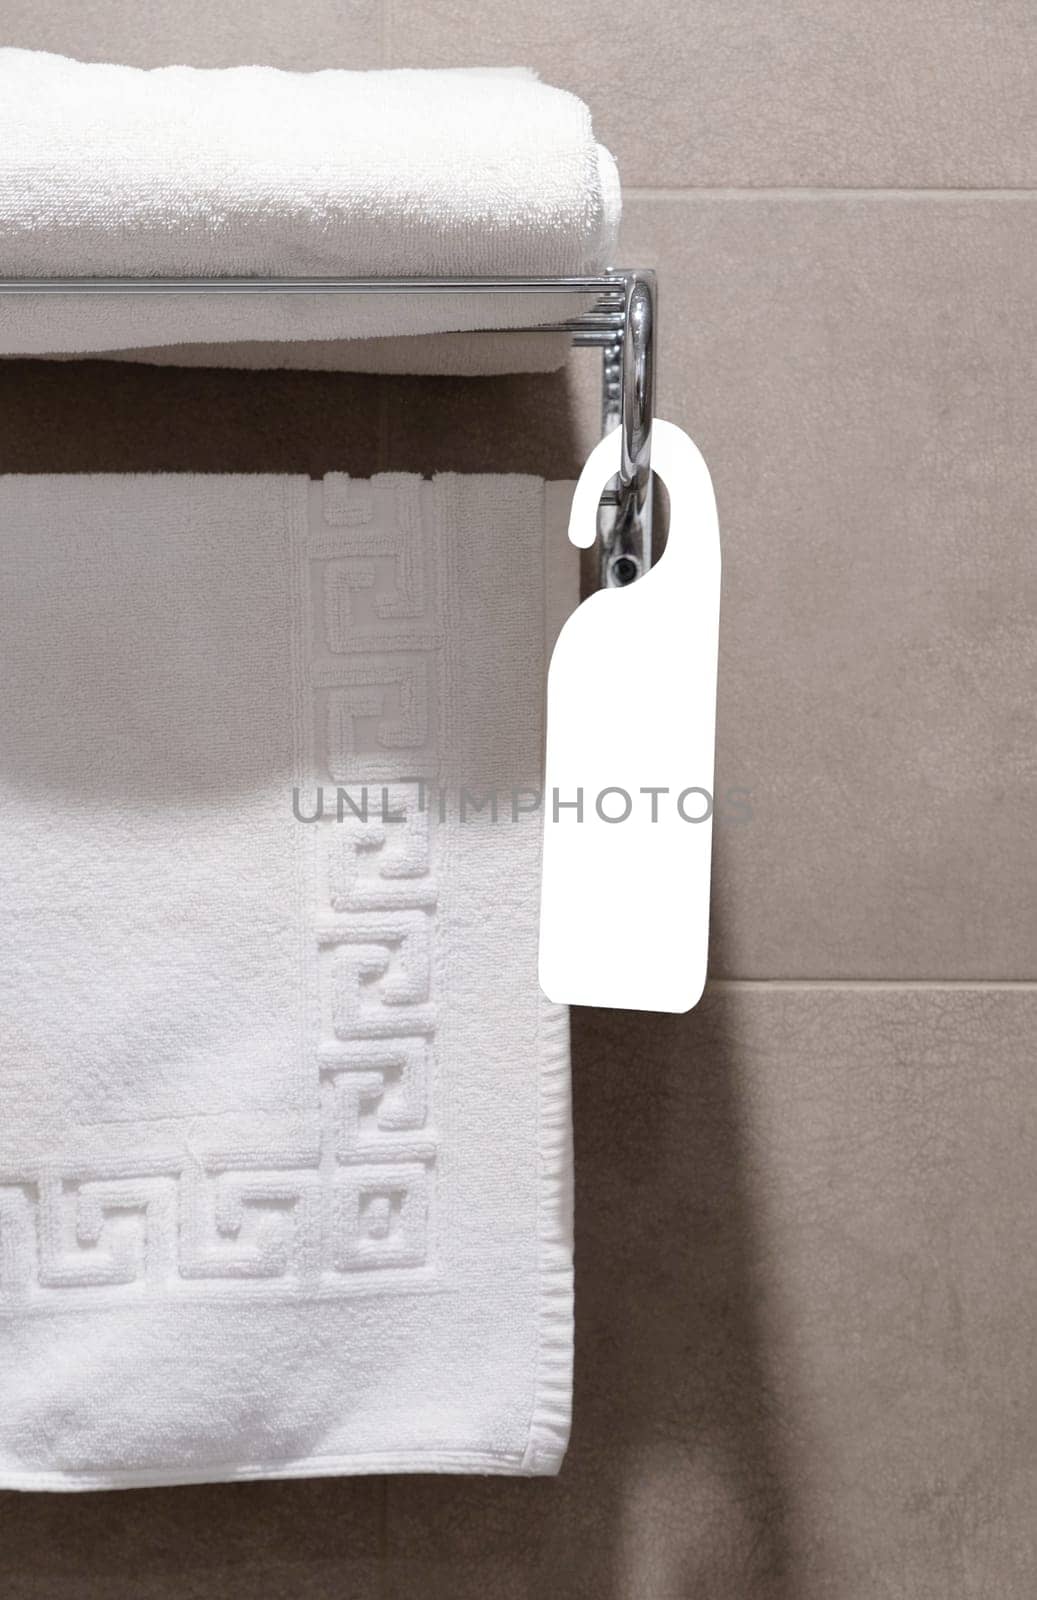 Set of white towels in the bathroom of a hotel room hung on a hanger with blank tag for mockup